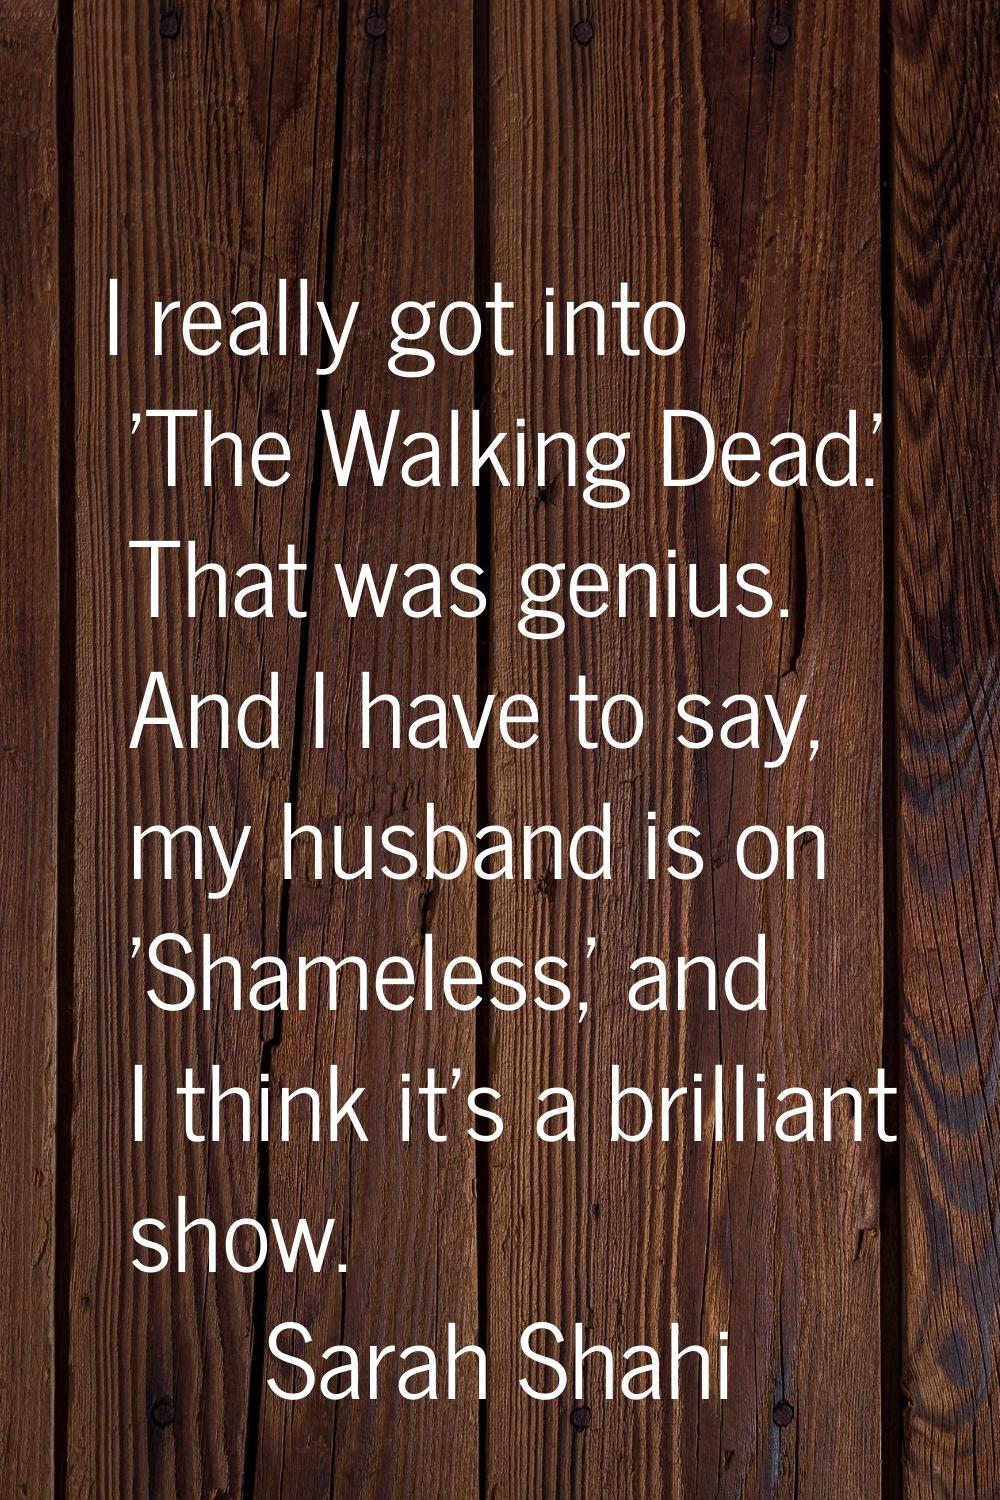 I really got into 'The Walking Dead.' That was genius. And I have to say, my husband is on 'Shamele